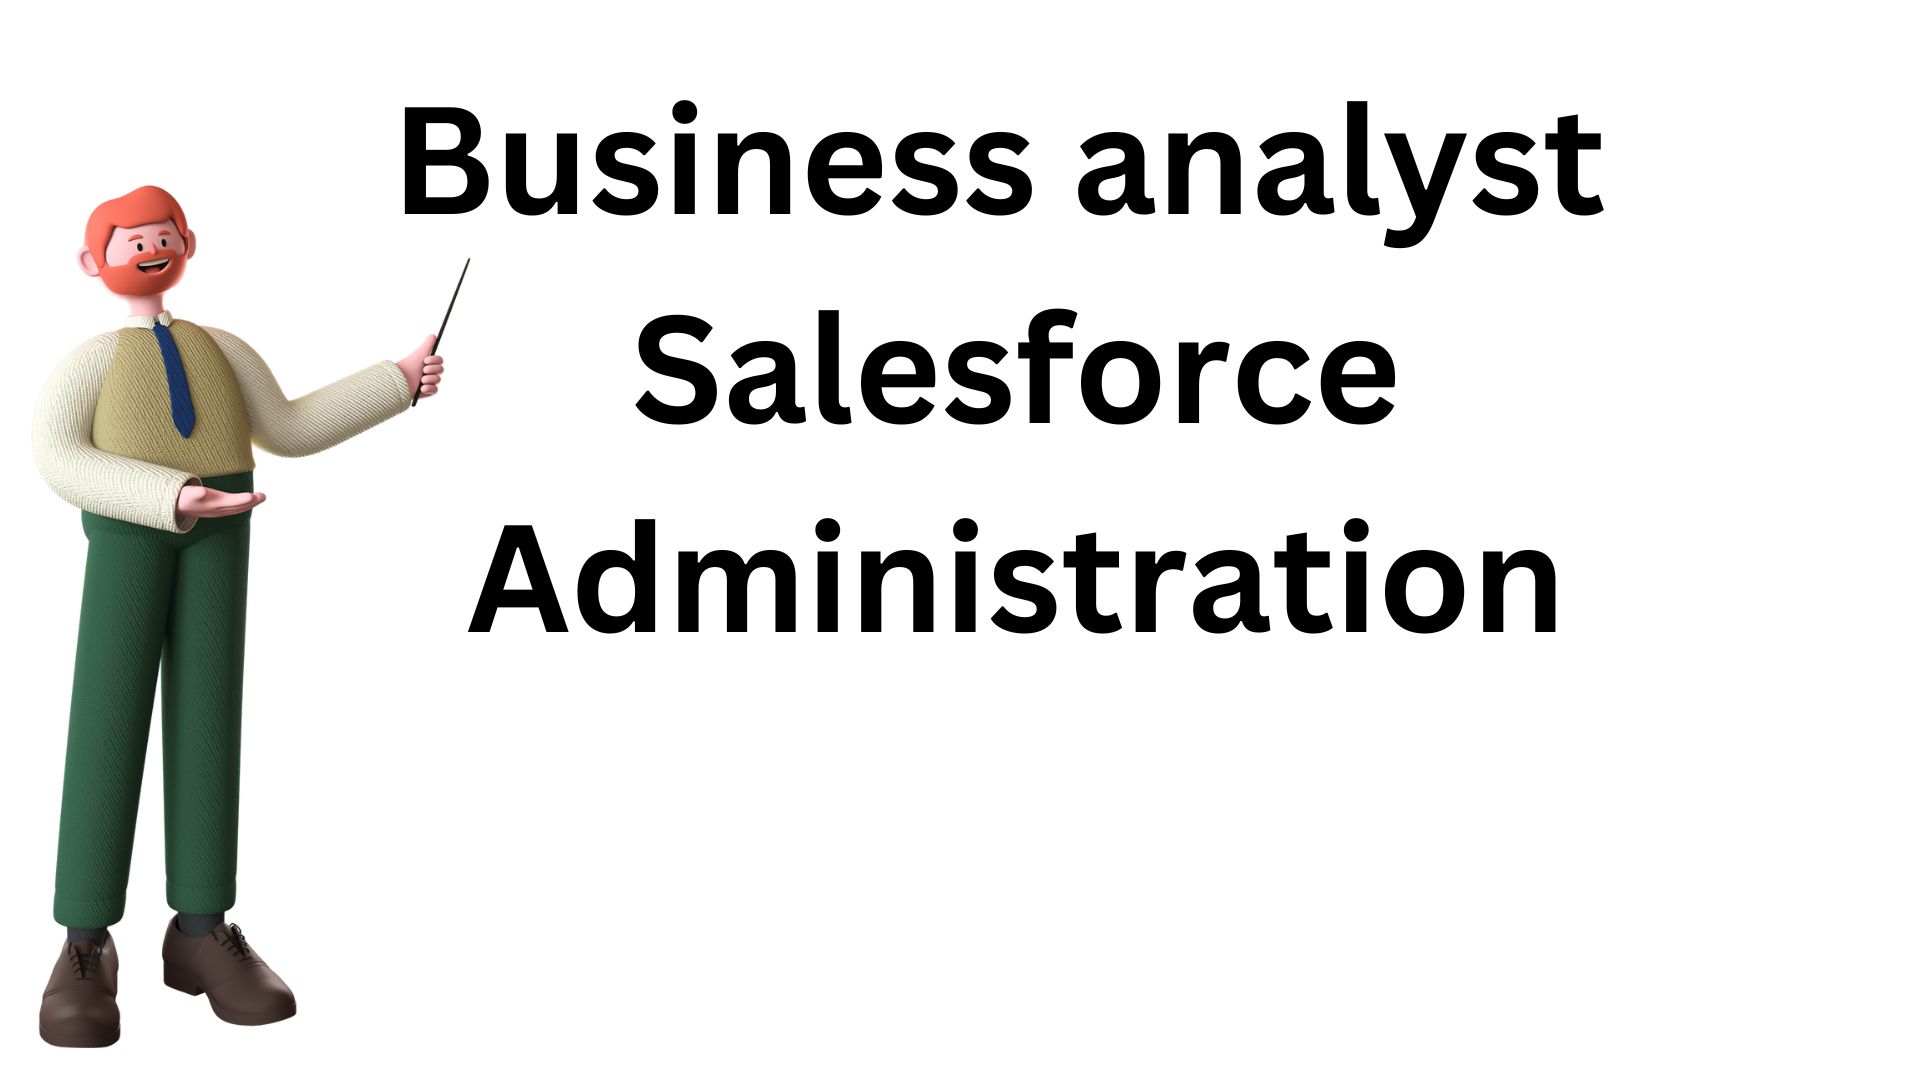  Business analyst - Salesforce Administration